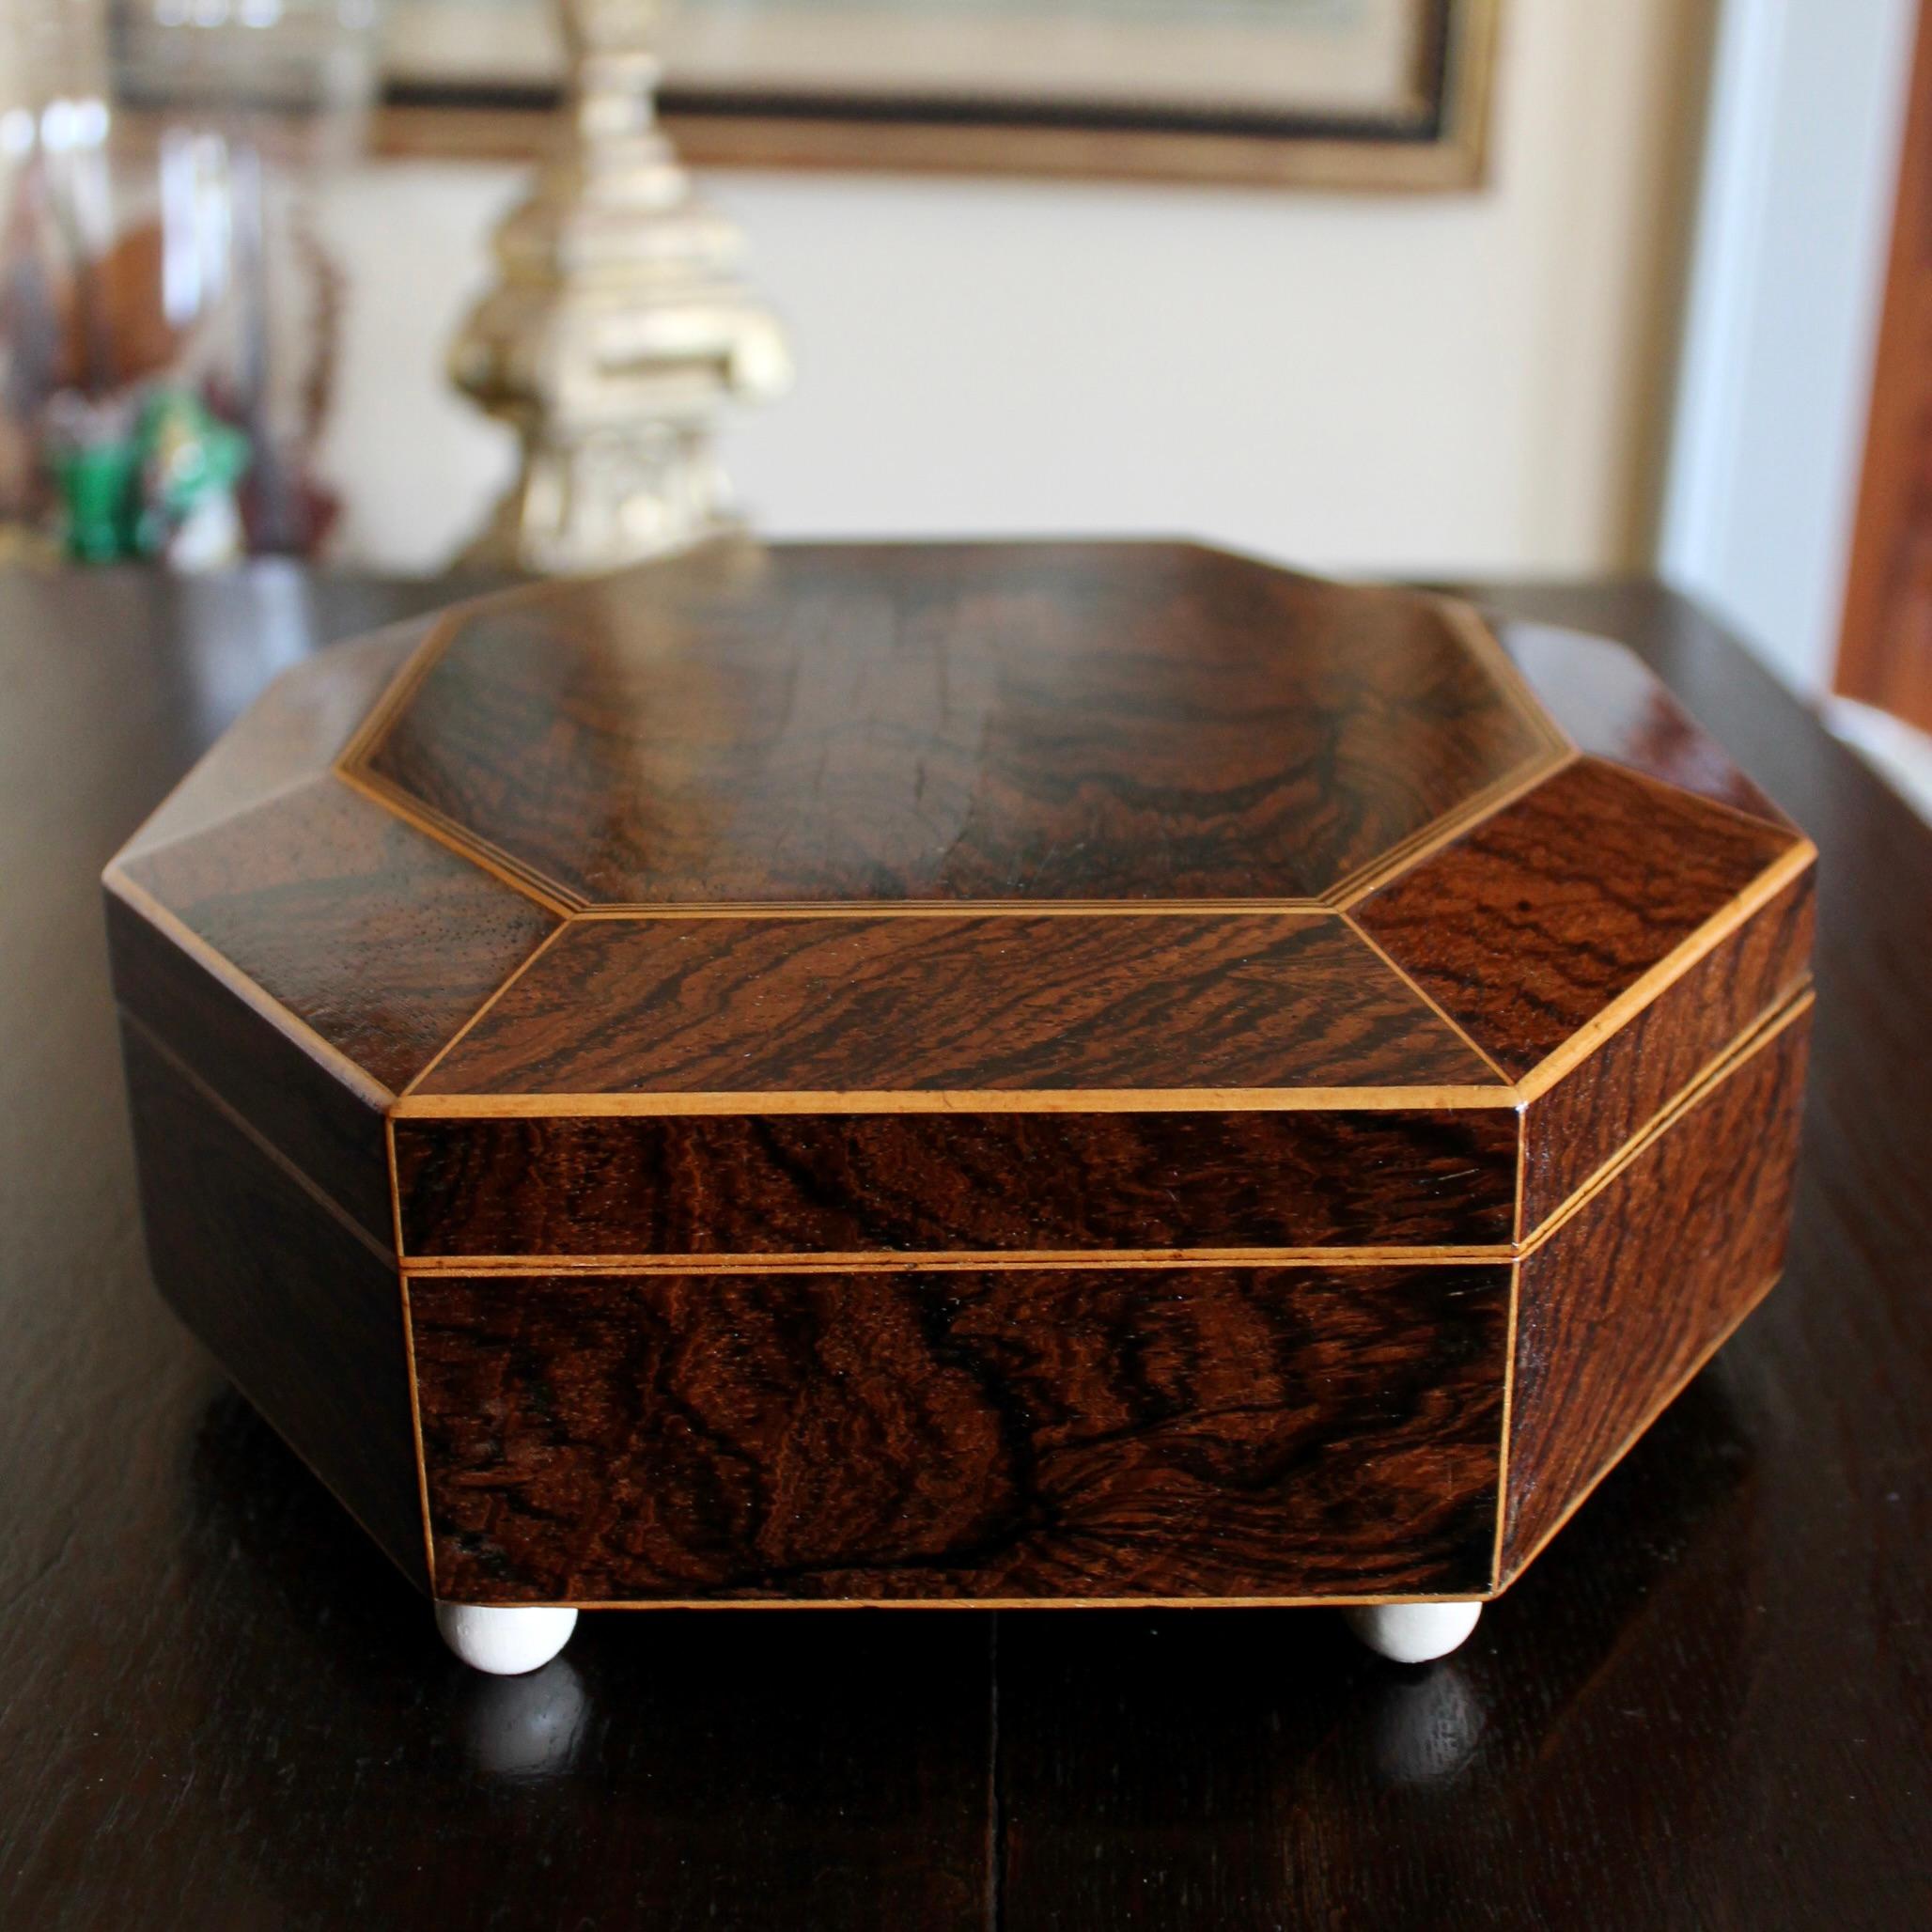 English Octagonal Rosewood with Boxwood Line Inlay Jewelry Box In Good Condition For Sale In Free Union, VA